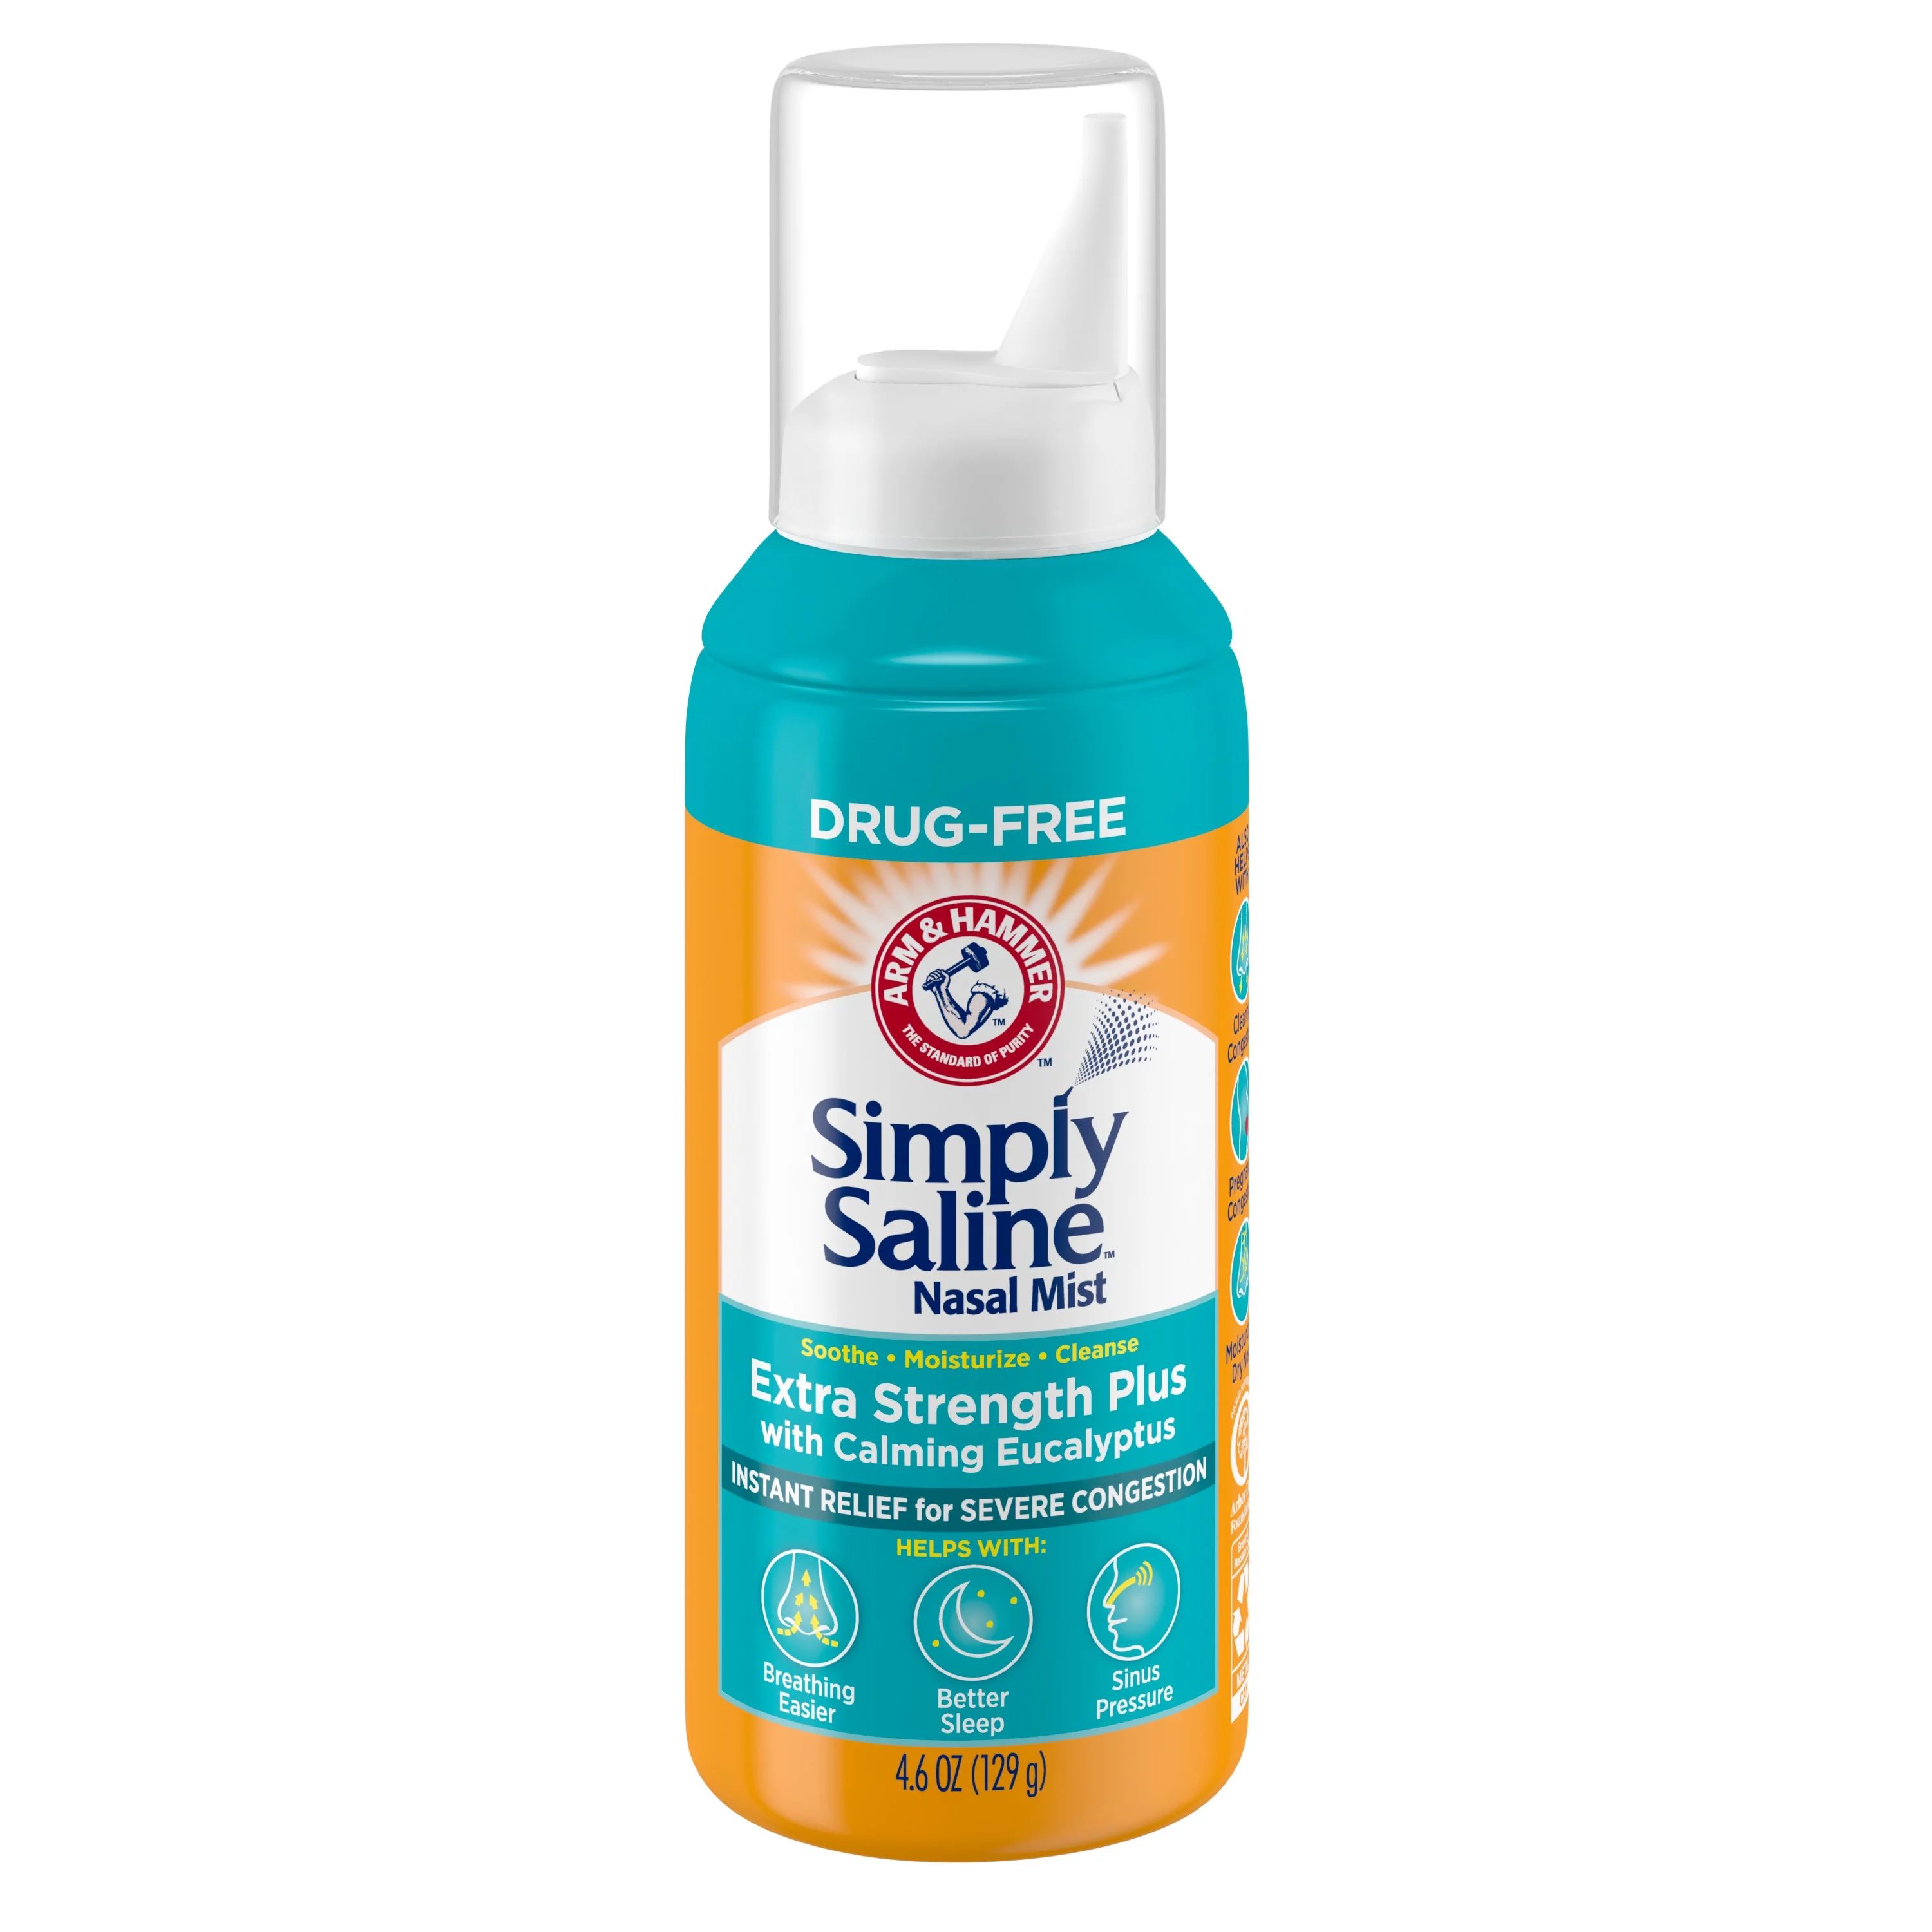 Simply Saline Extra Strength Plus with Calming Eucalyptus for Severe Congestion Relief Nasal Mist... | Walmart (US)